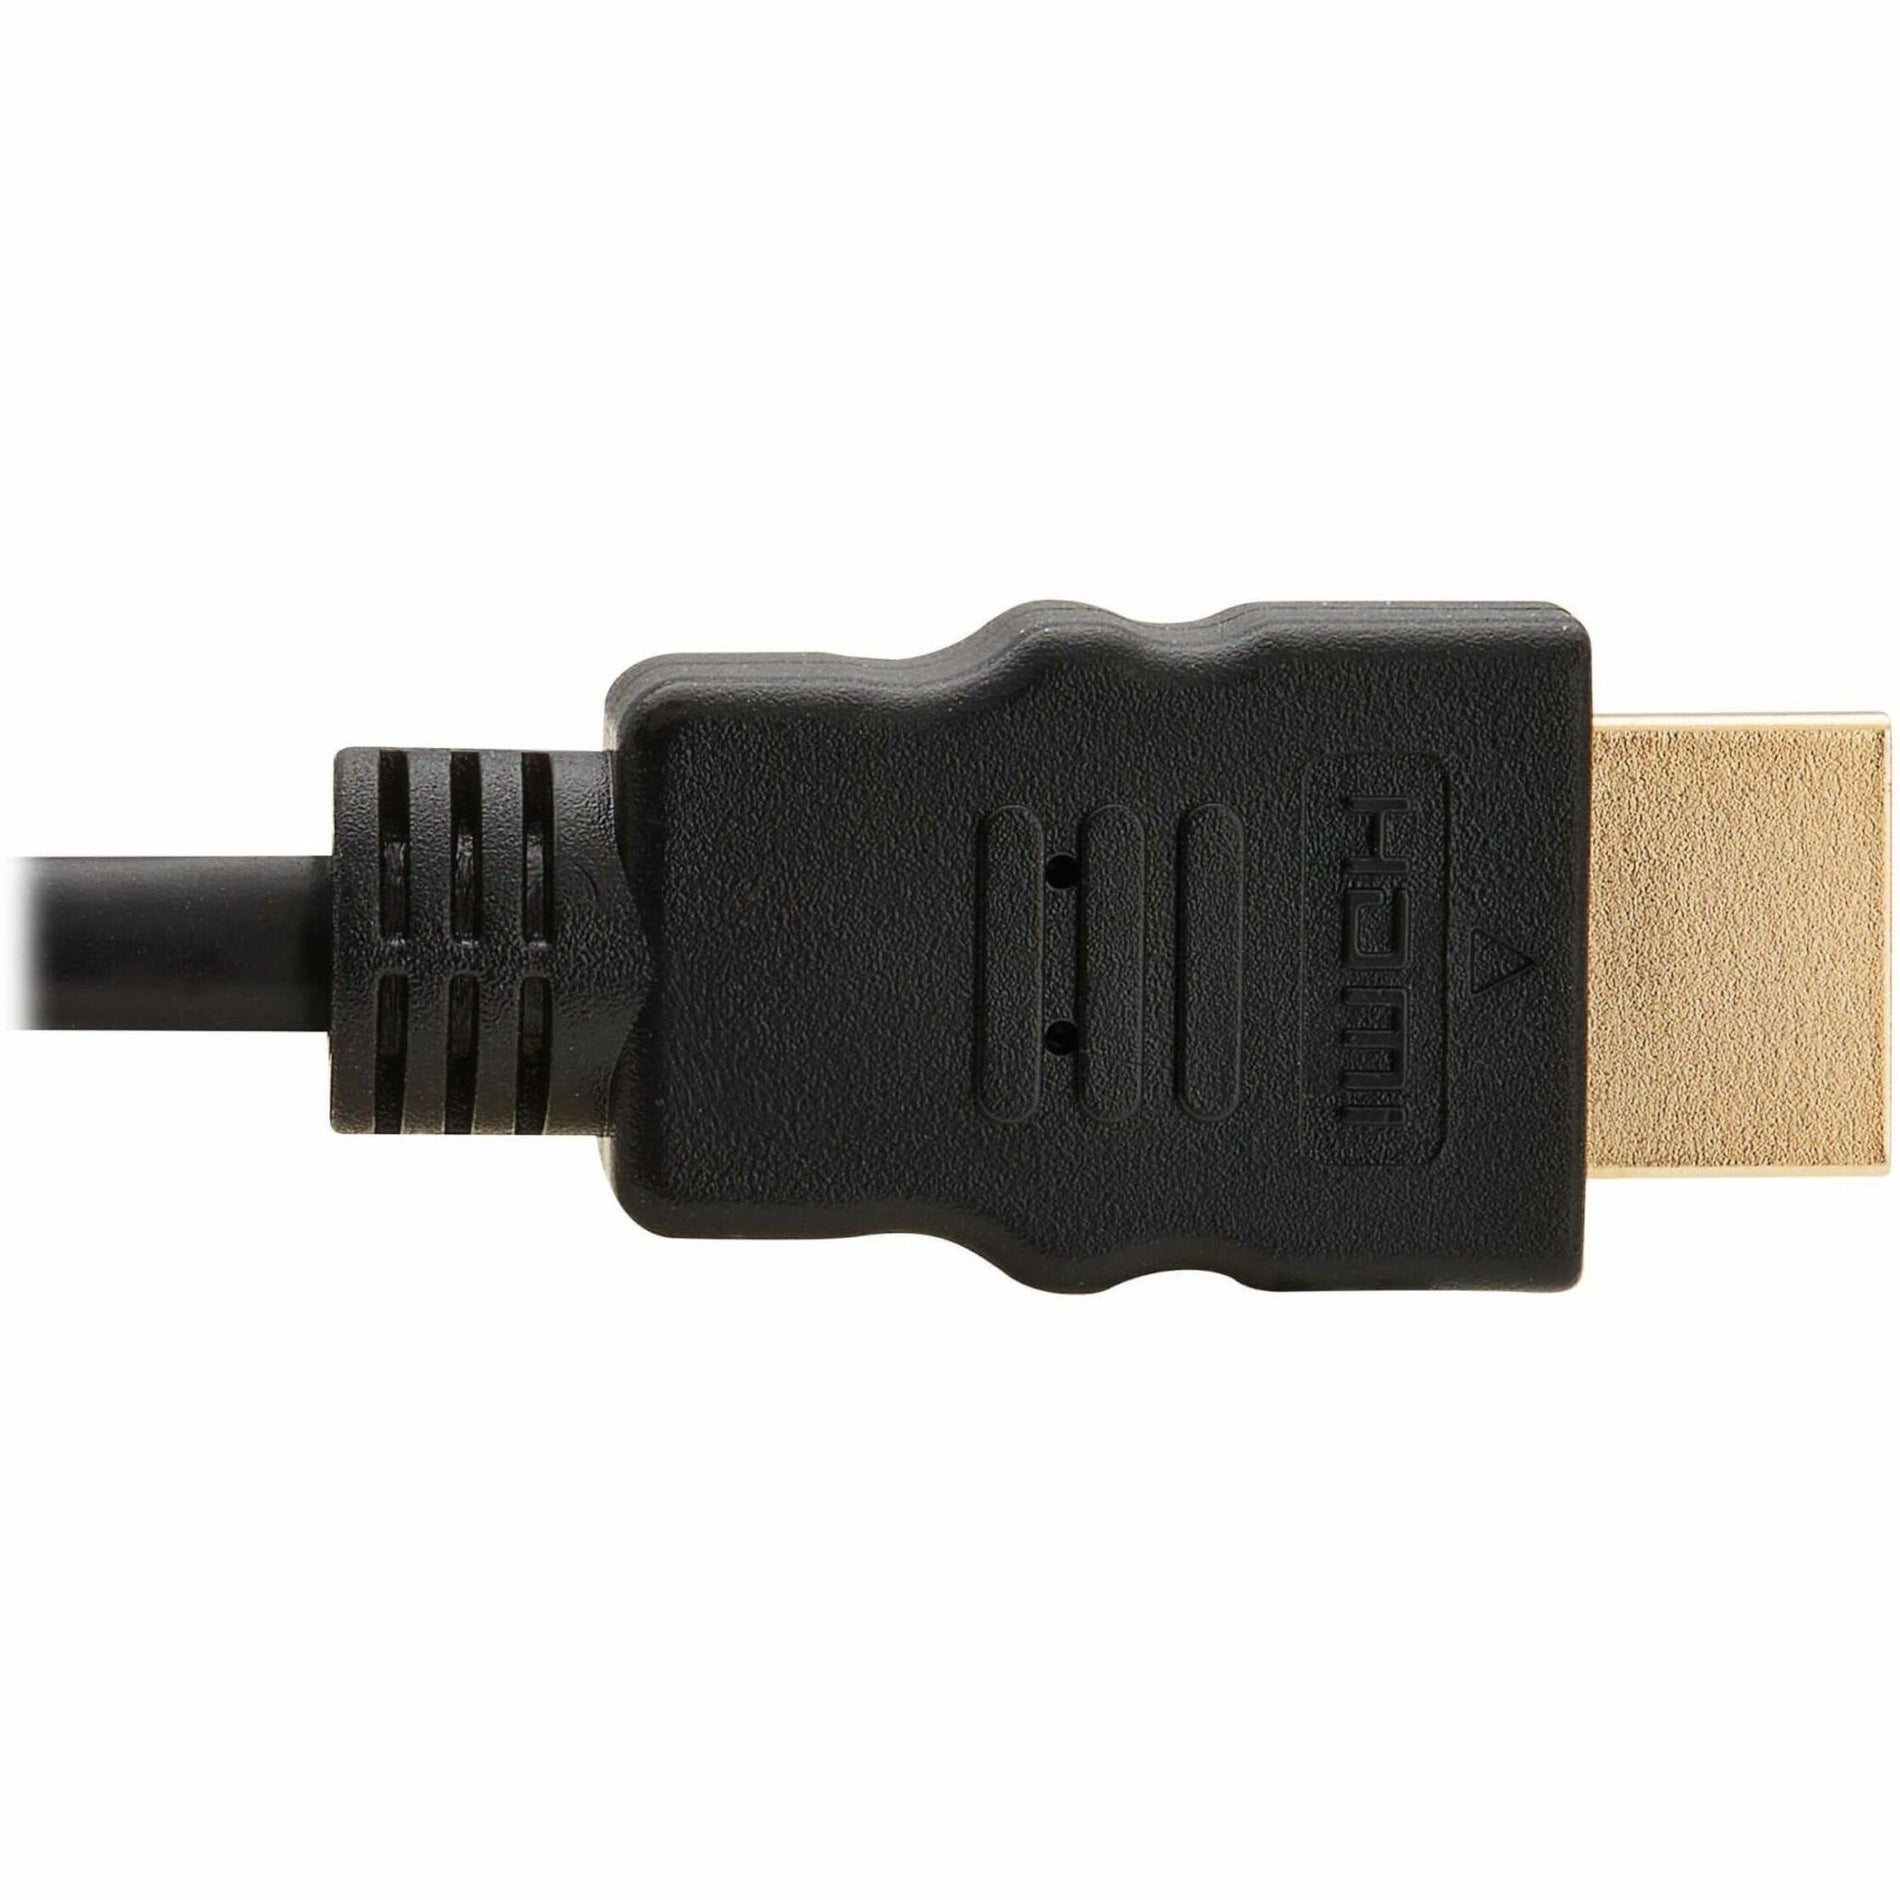 Tripp Lite P568-035 35-ft. High Speed HDMI Gold Cable, 18 Gbit/s Data Transfer Rate, EMI/RF Protection